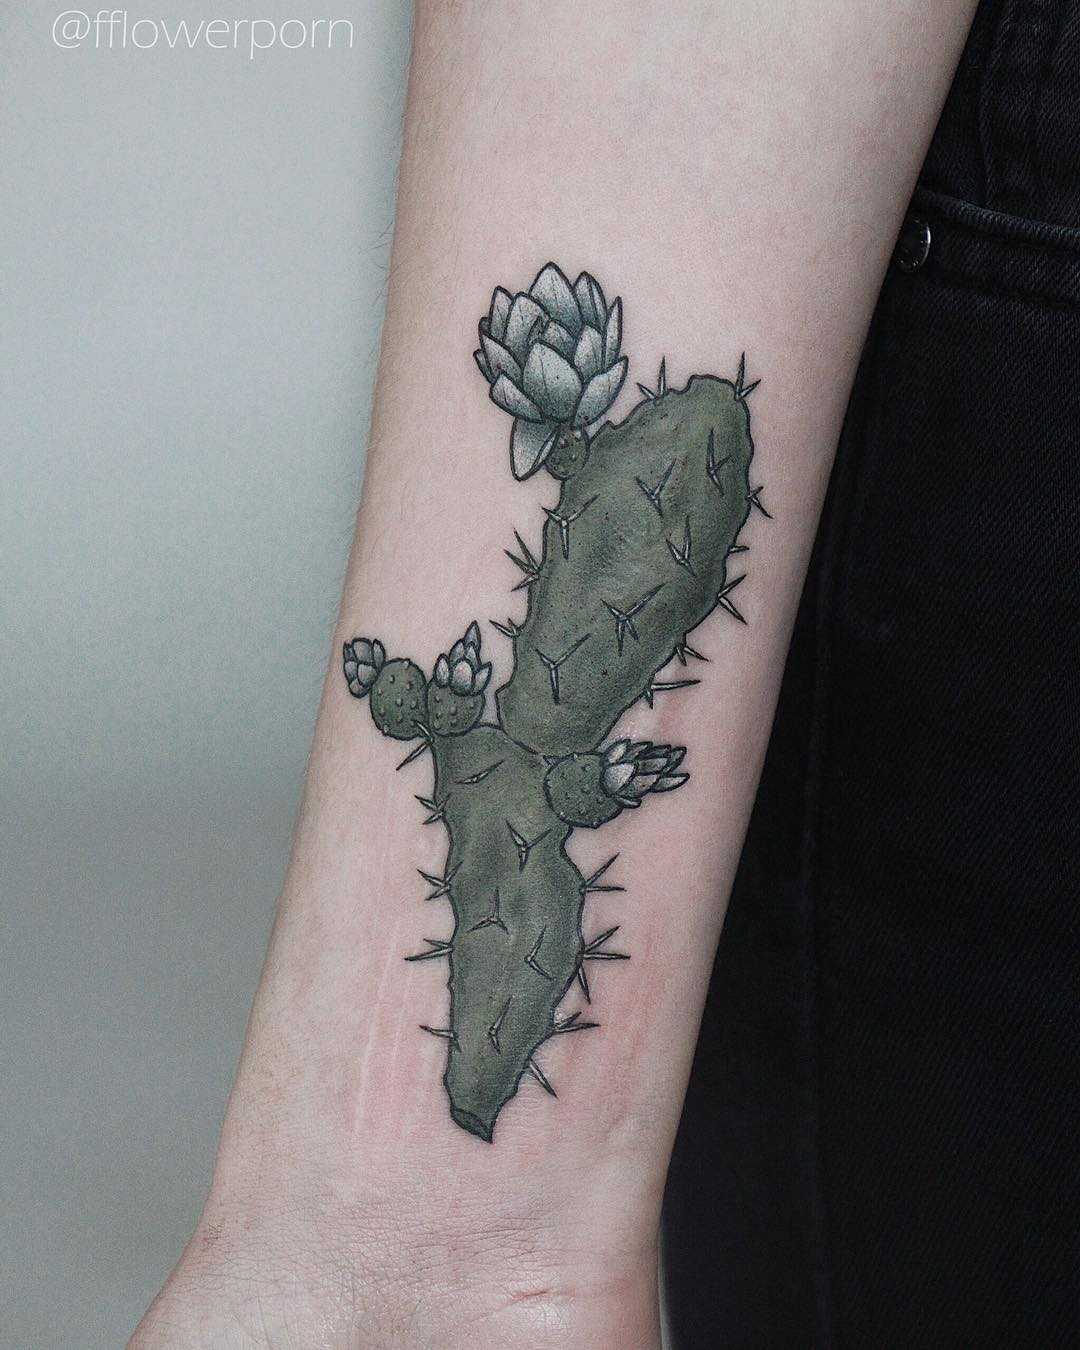 Green cactus tattoo on the right forearm